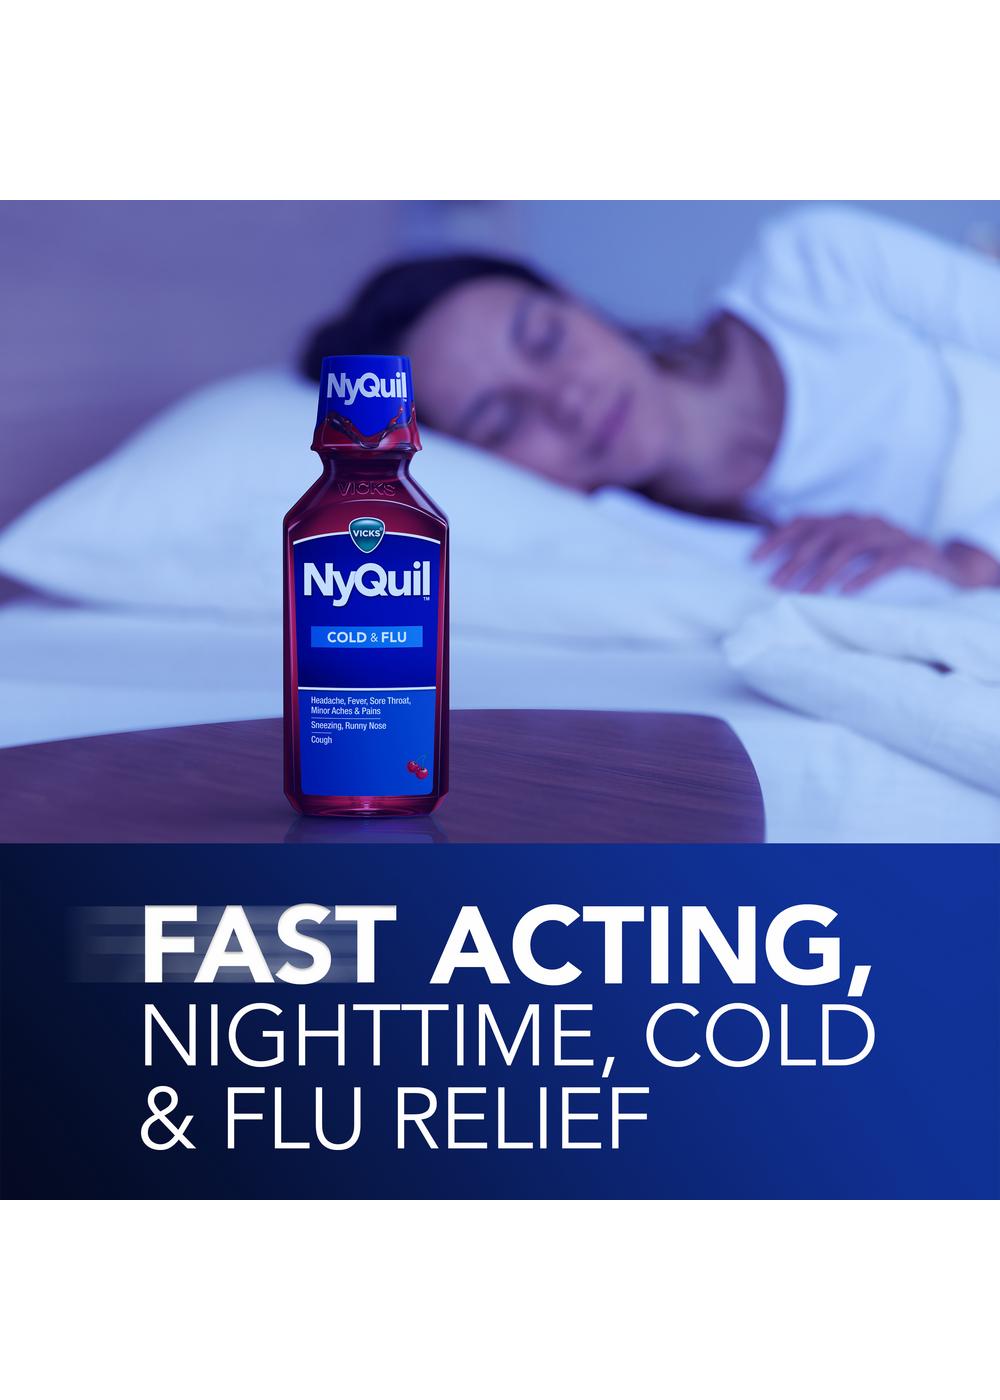 Vicks NyQuil Cold & Flu Relief Liquid - Cherry; image 5 of 9